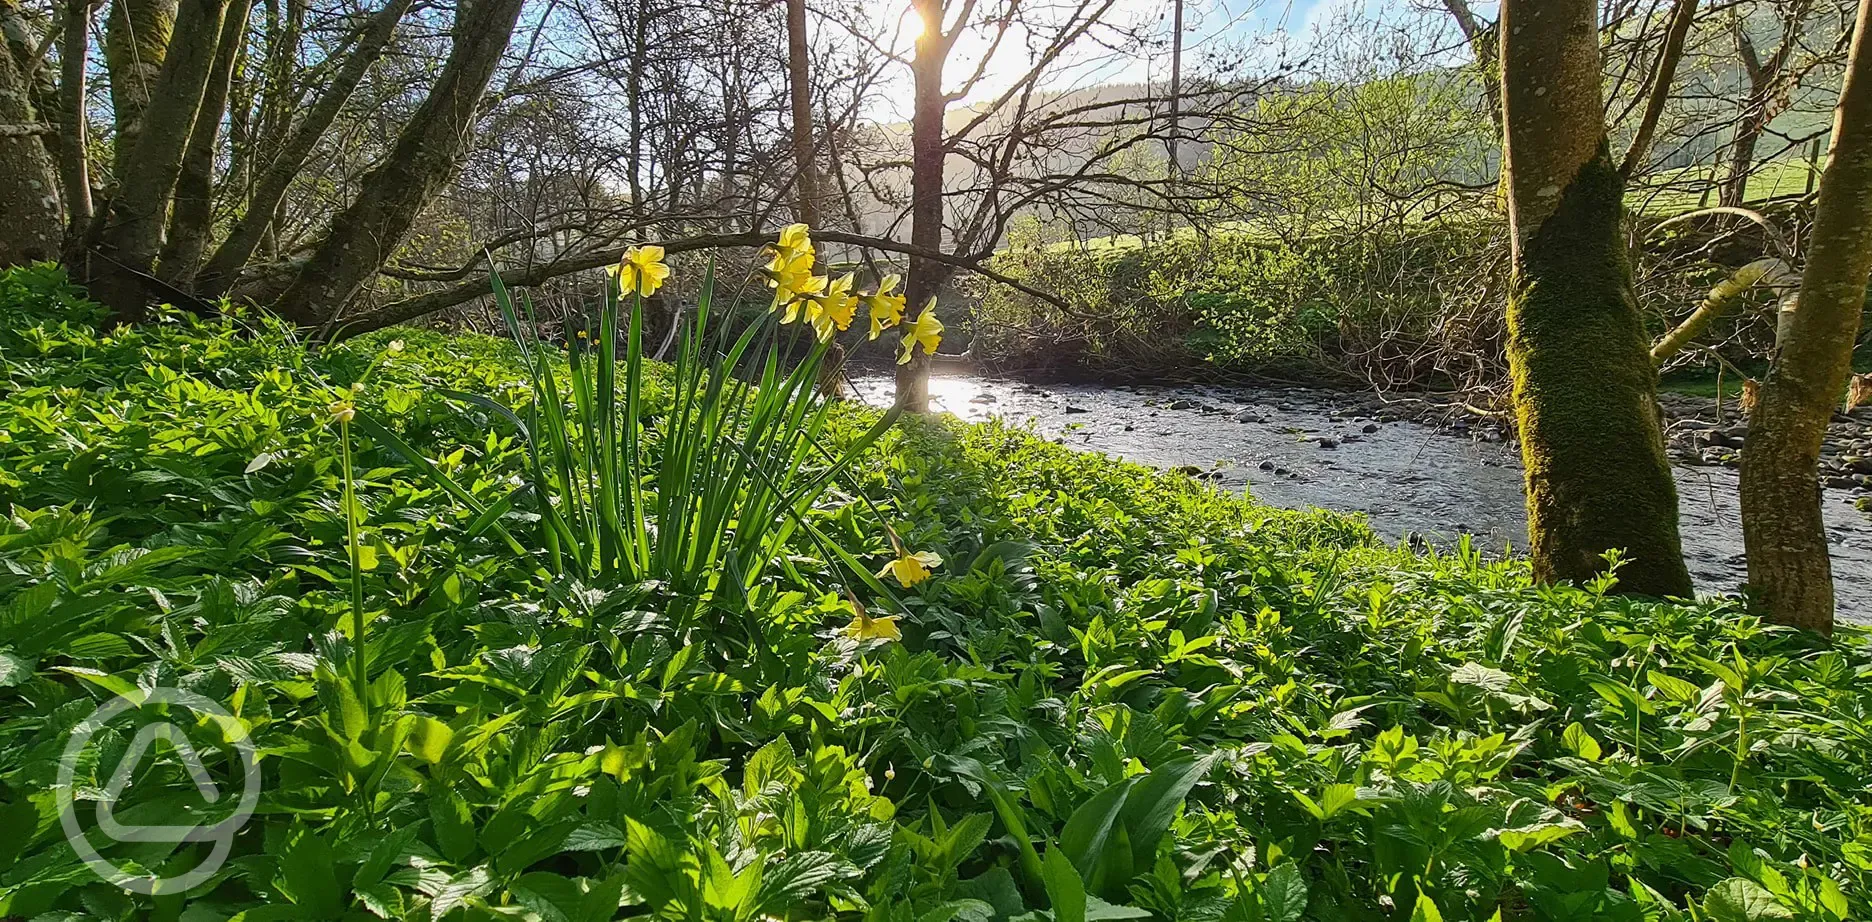 Daffodils by river